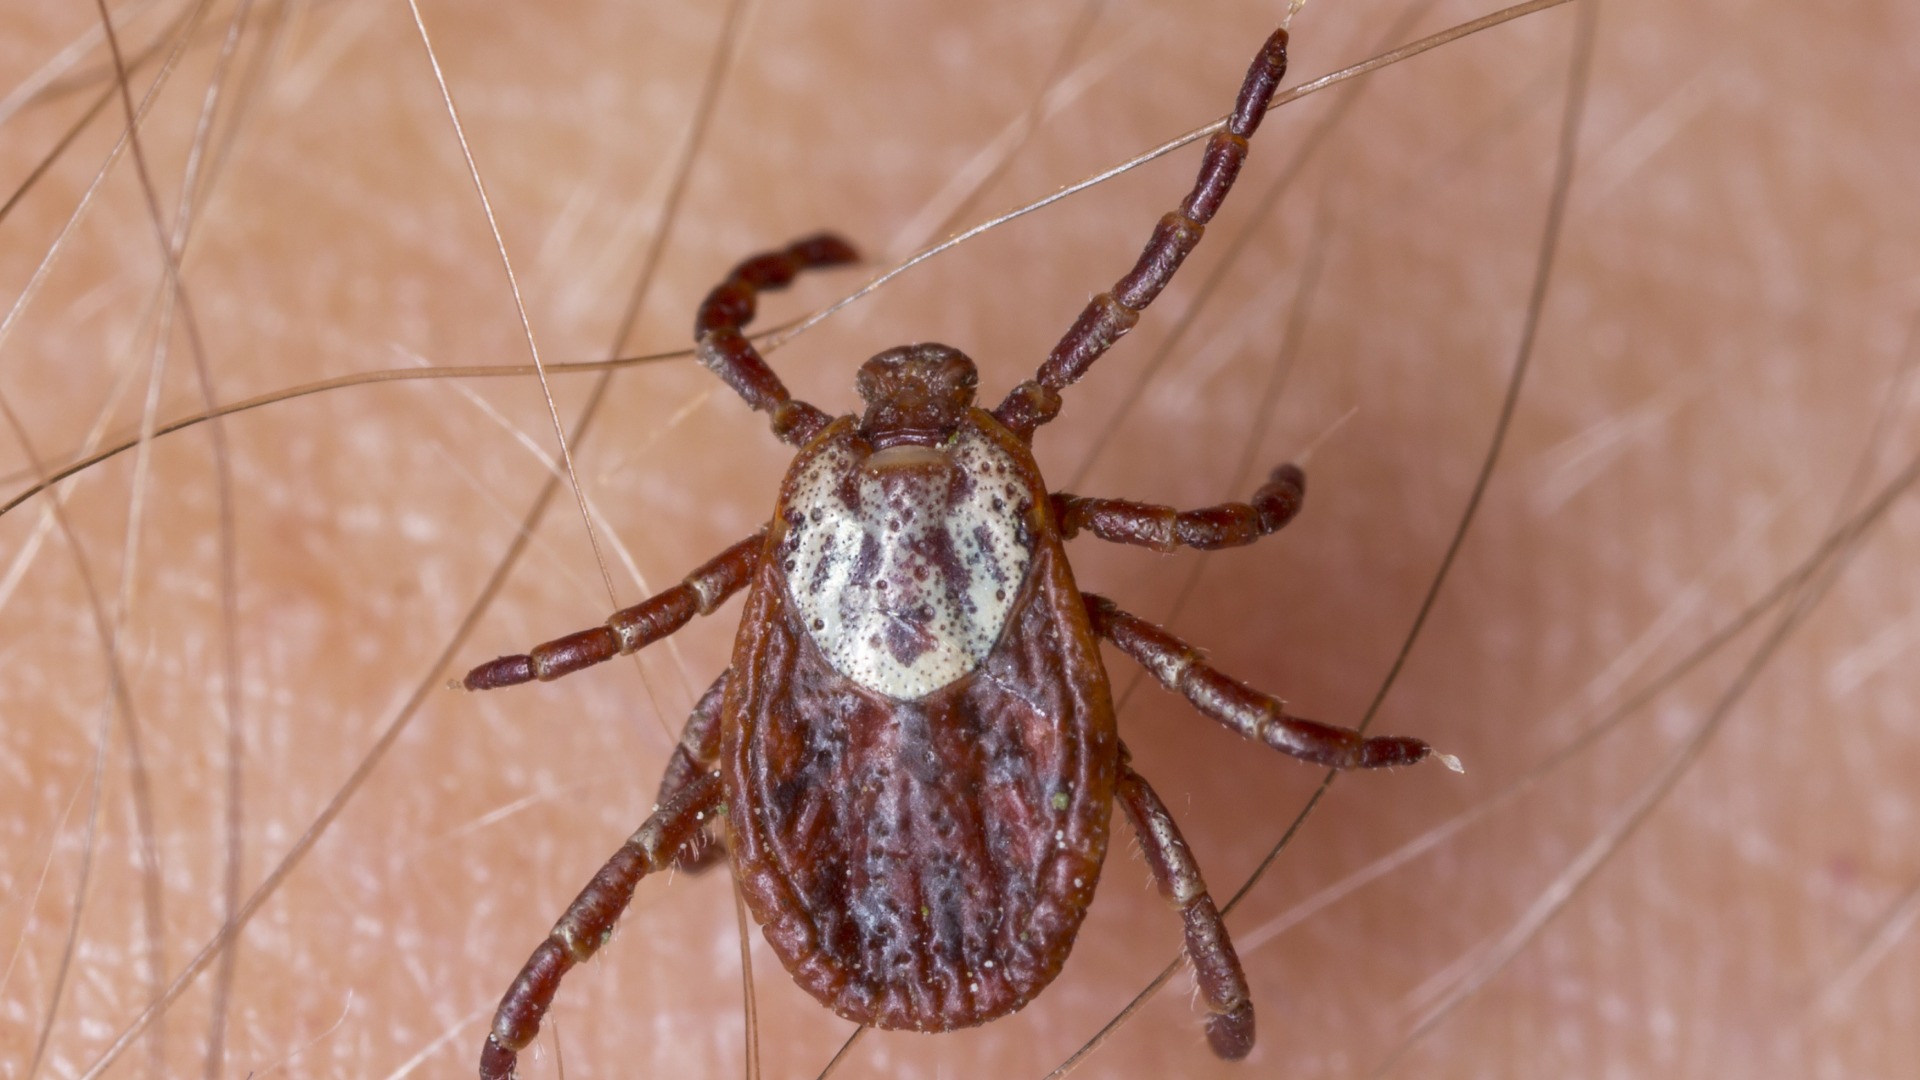 2022’s Tick Season Has Arrived - Protect Yourself With These Tips